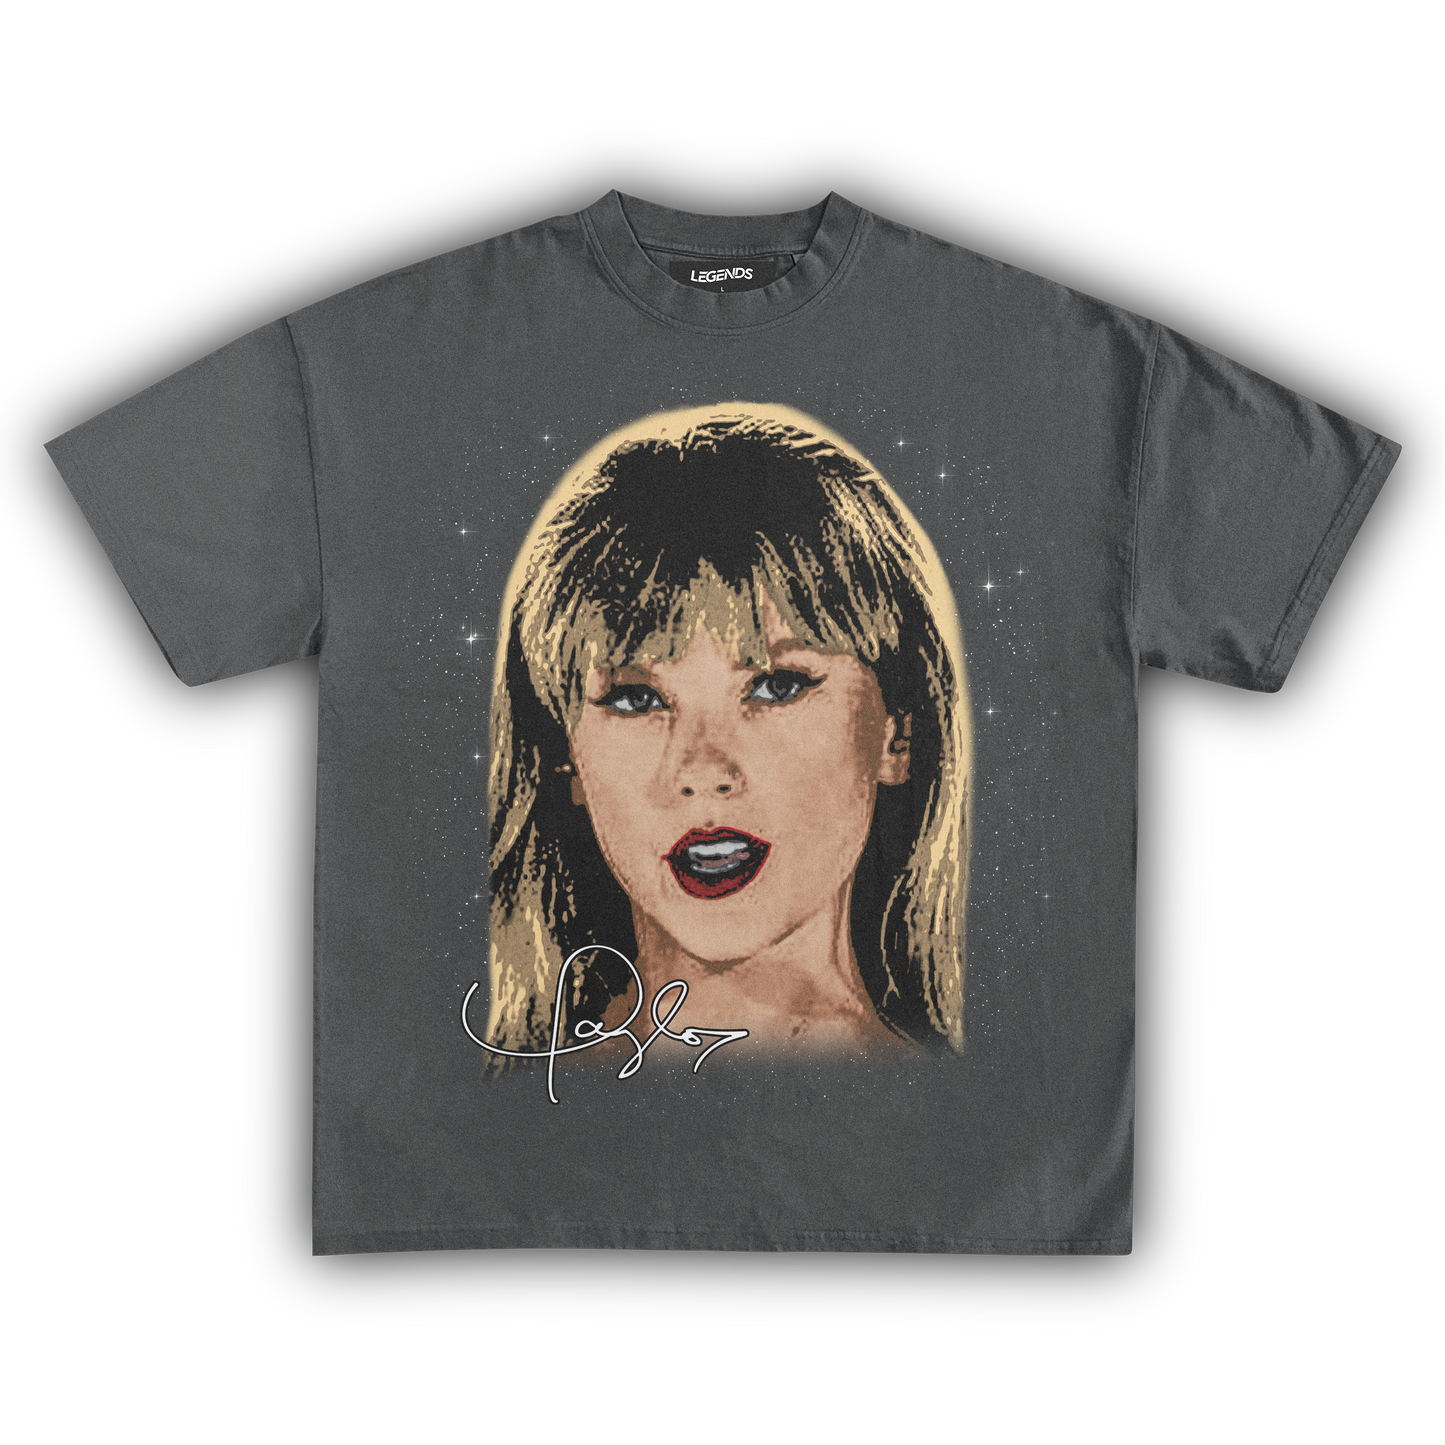 TAYLOR SWIFT SPARKS FLY TEE